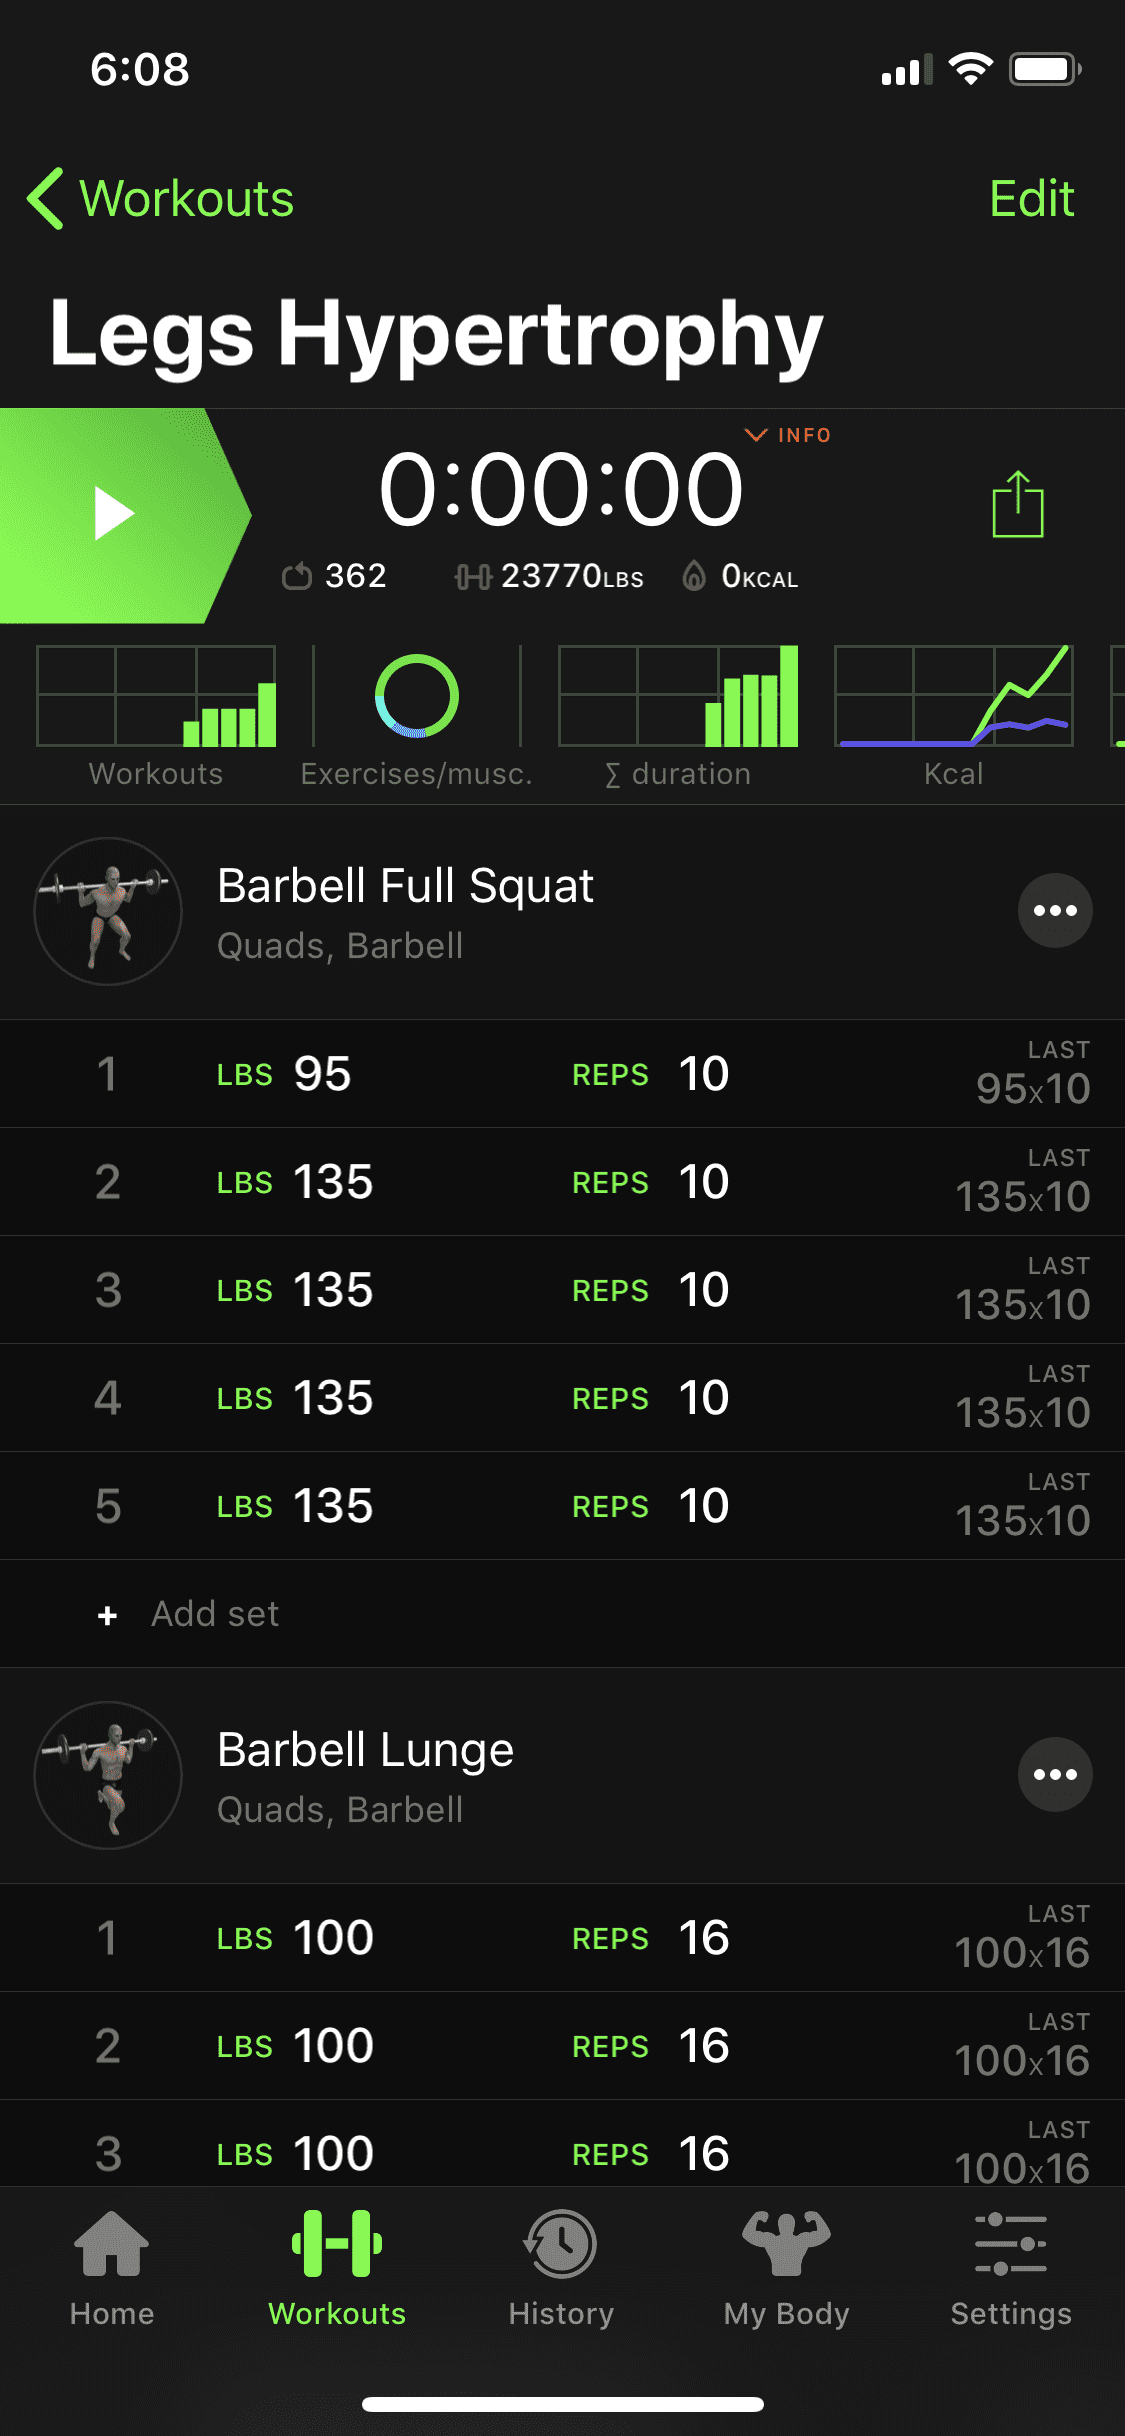 ONE: List of Workouts. TWO: Detailed Workout View. THREE: Detailed Exercise View.